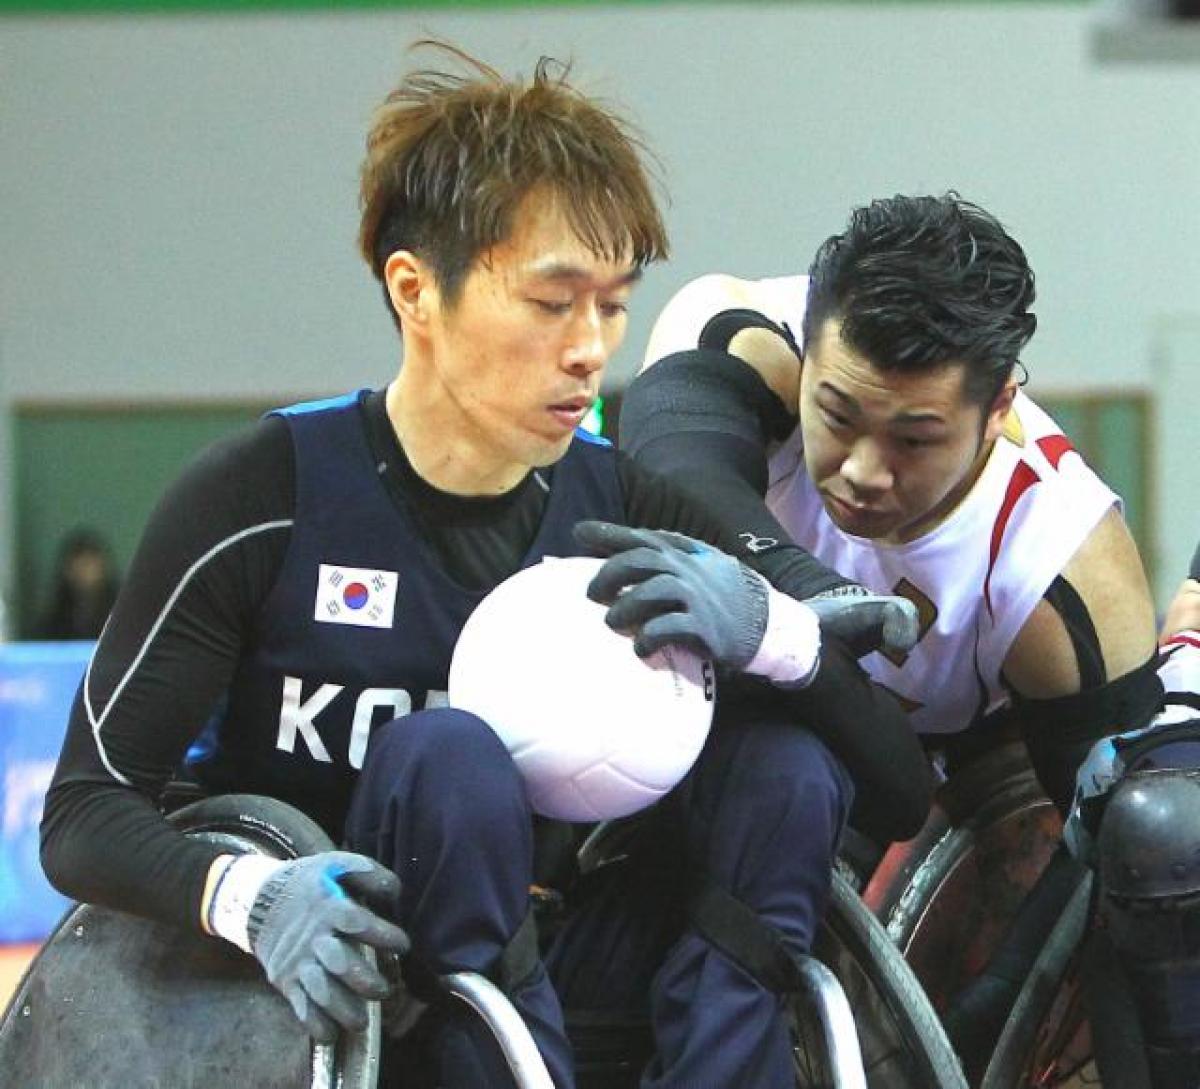 Two men in wheelchairs playing rugby, fighting for the ball